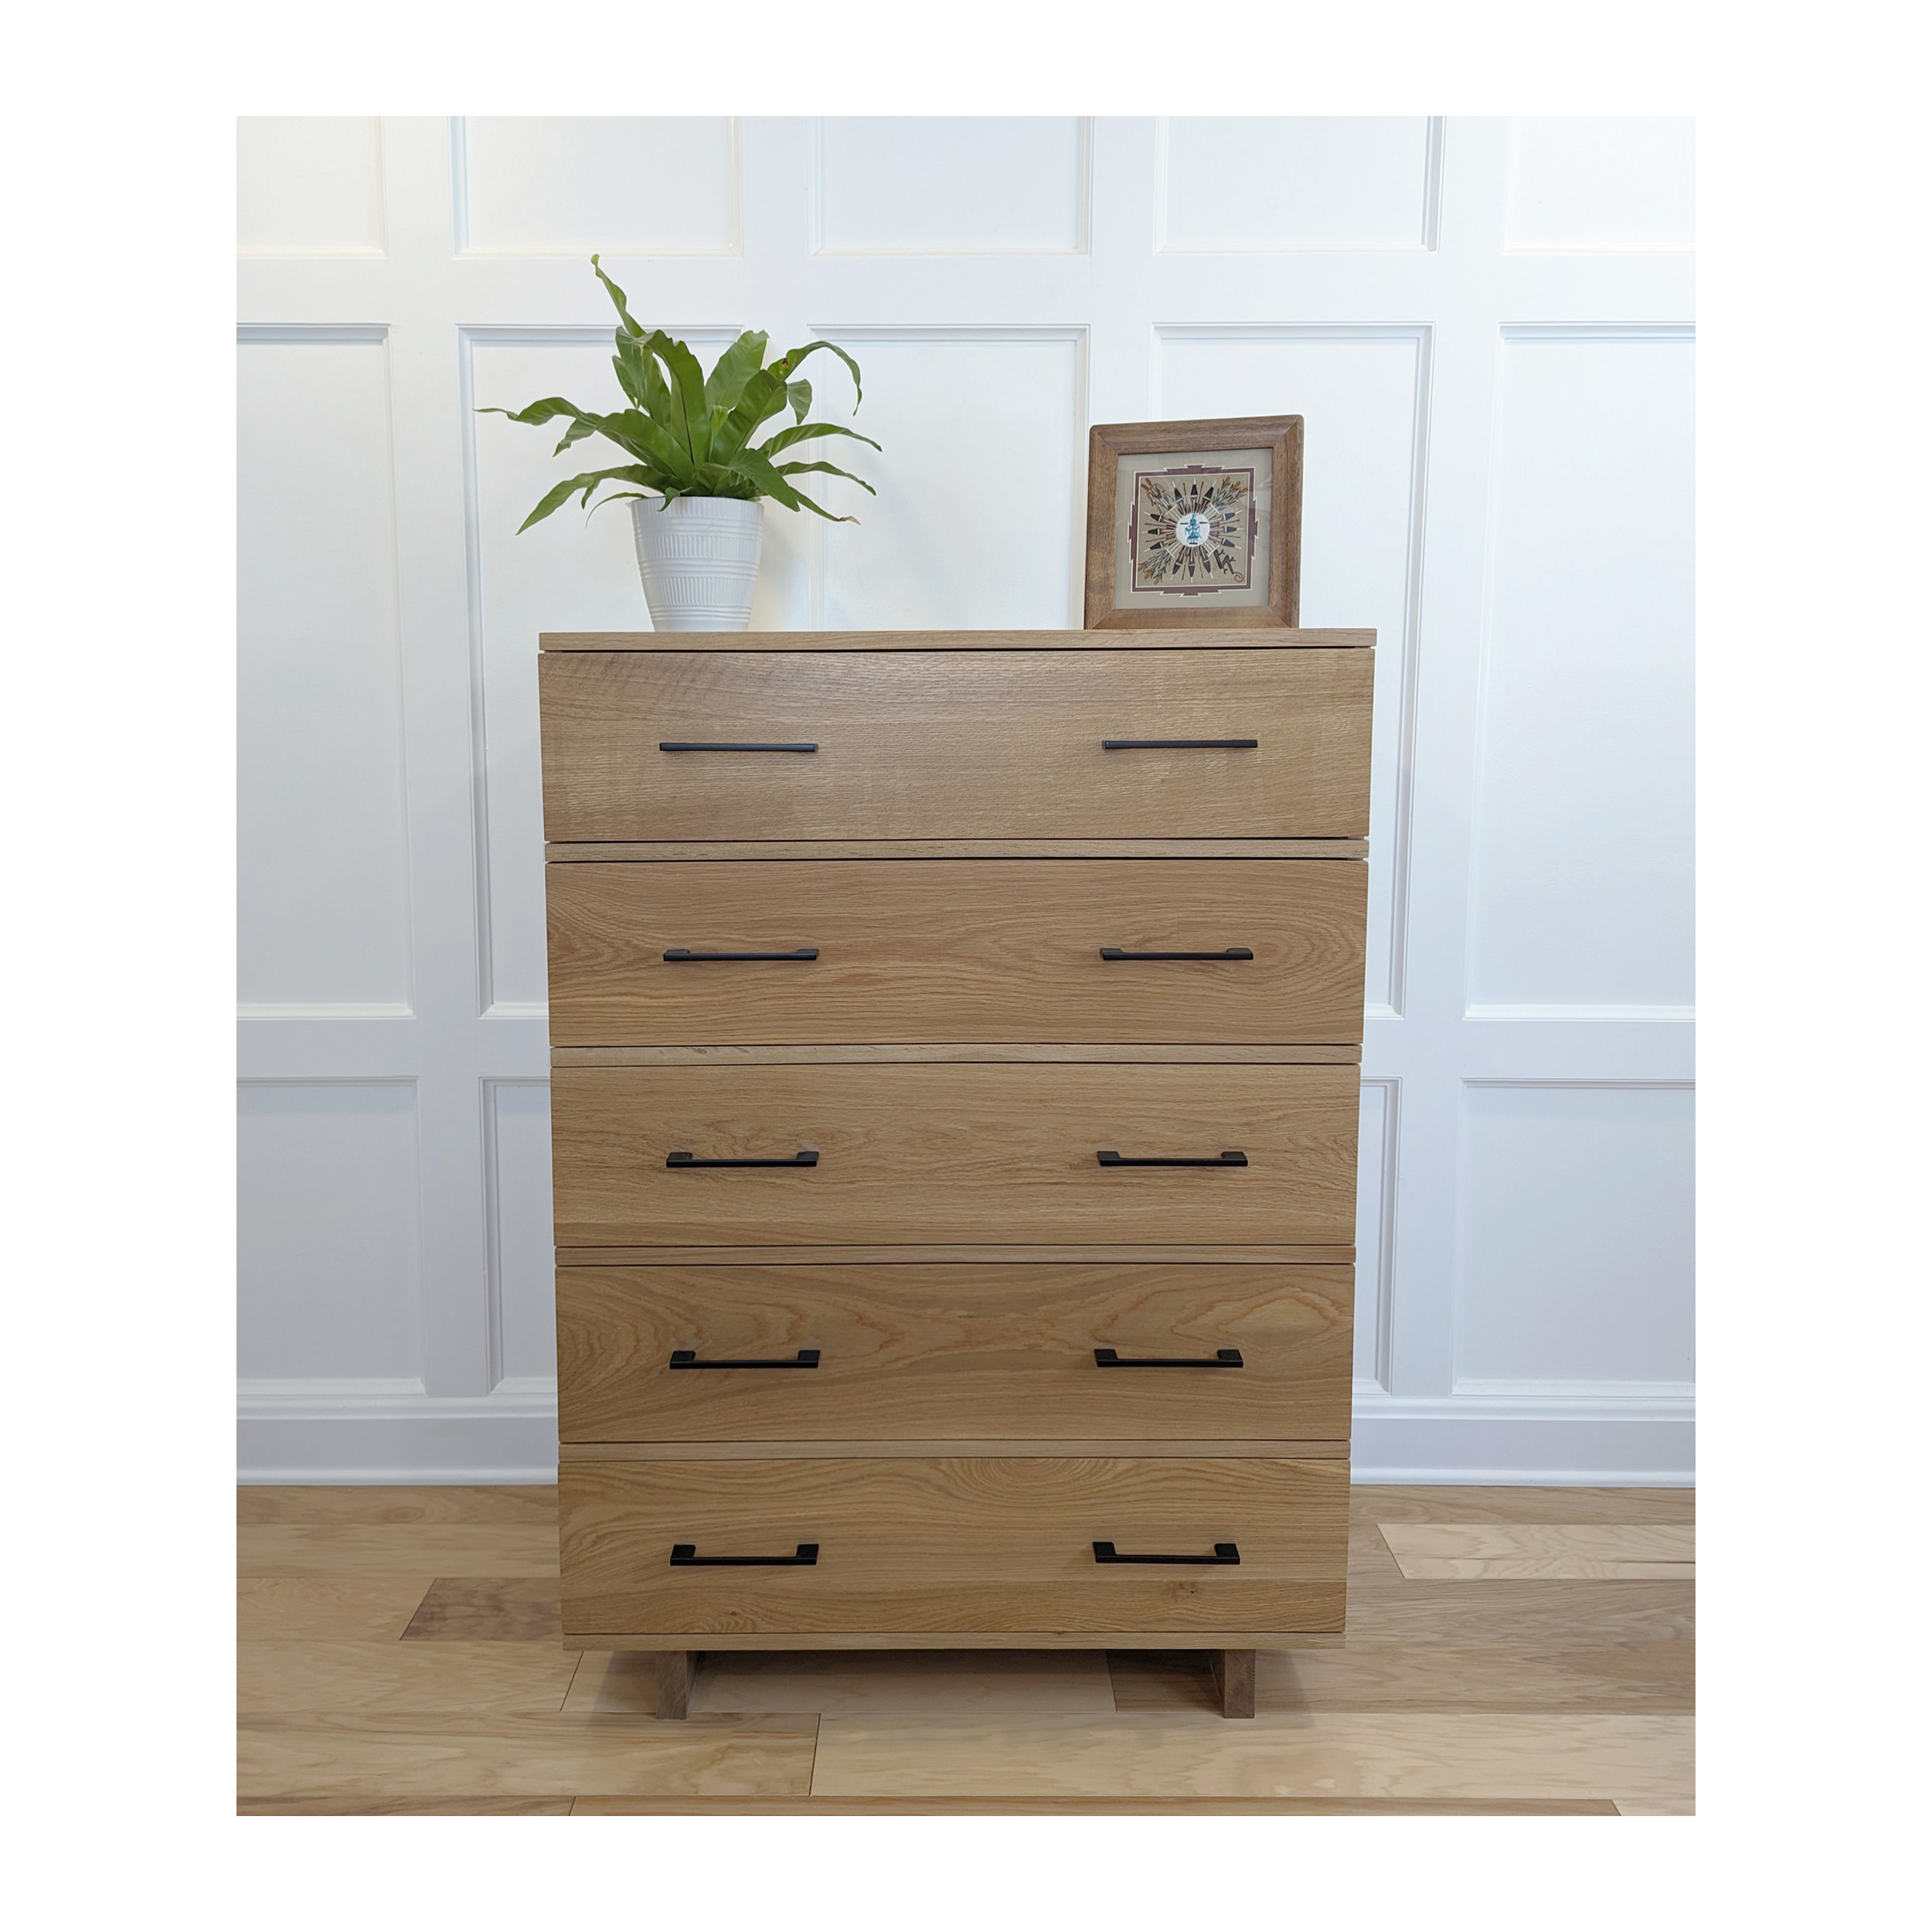 Series 252 Tall Dresser With Five Drawers At 36″ In Width